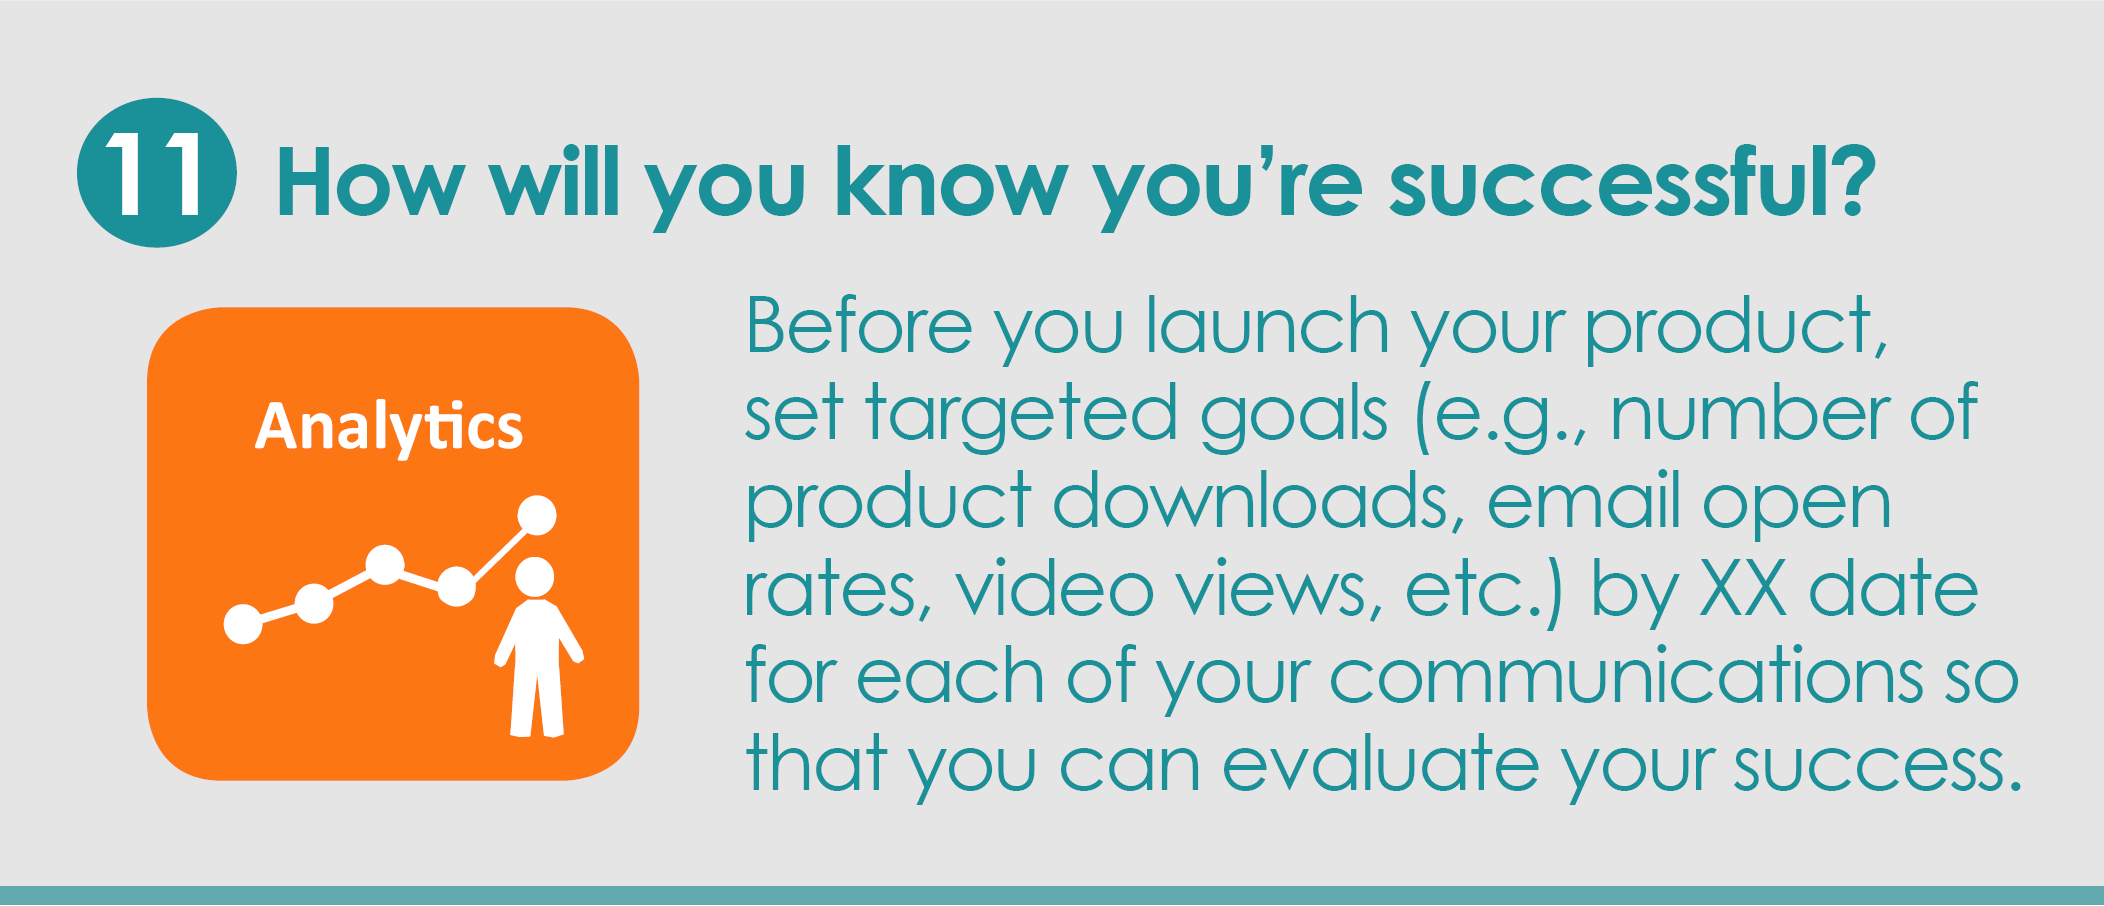 Step 11: How will you know you're successful? Before you launch your product, set targeted goals (e.g., number of product downloads, email open rates, video views, etc.) by XX date for each of your communications so that you can evaluate your success. 